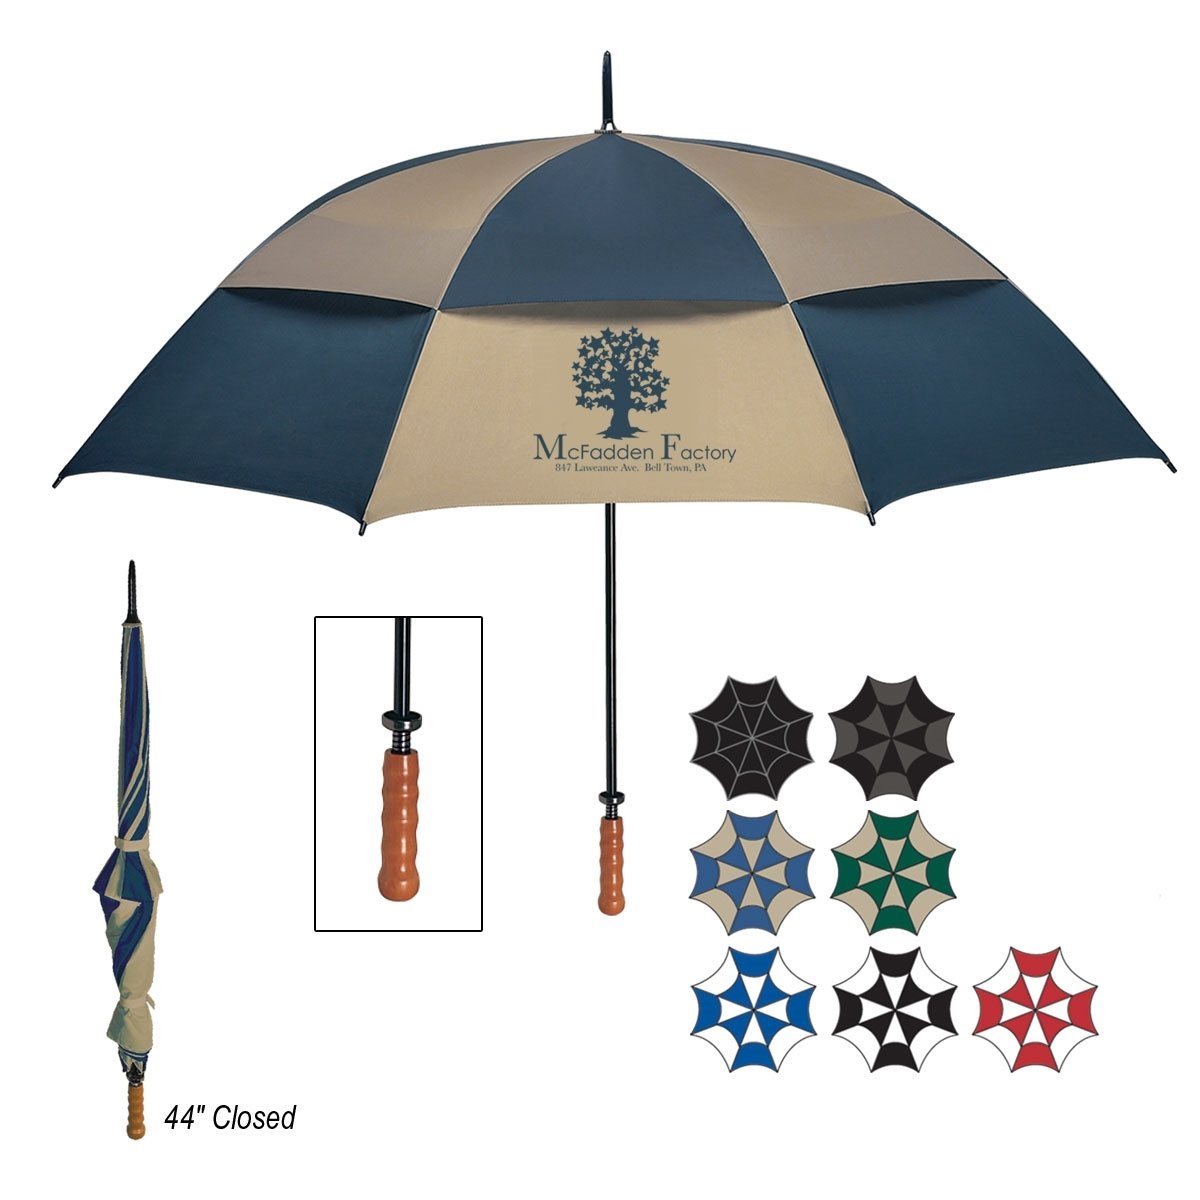 Do umbrellas protect you from heat?